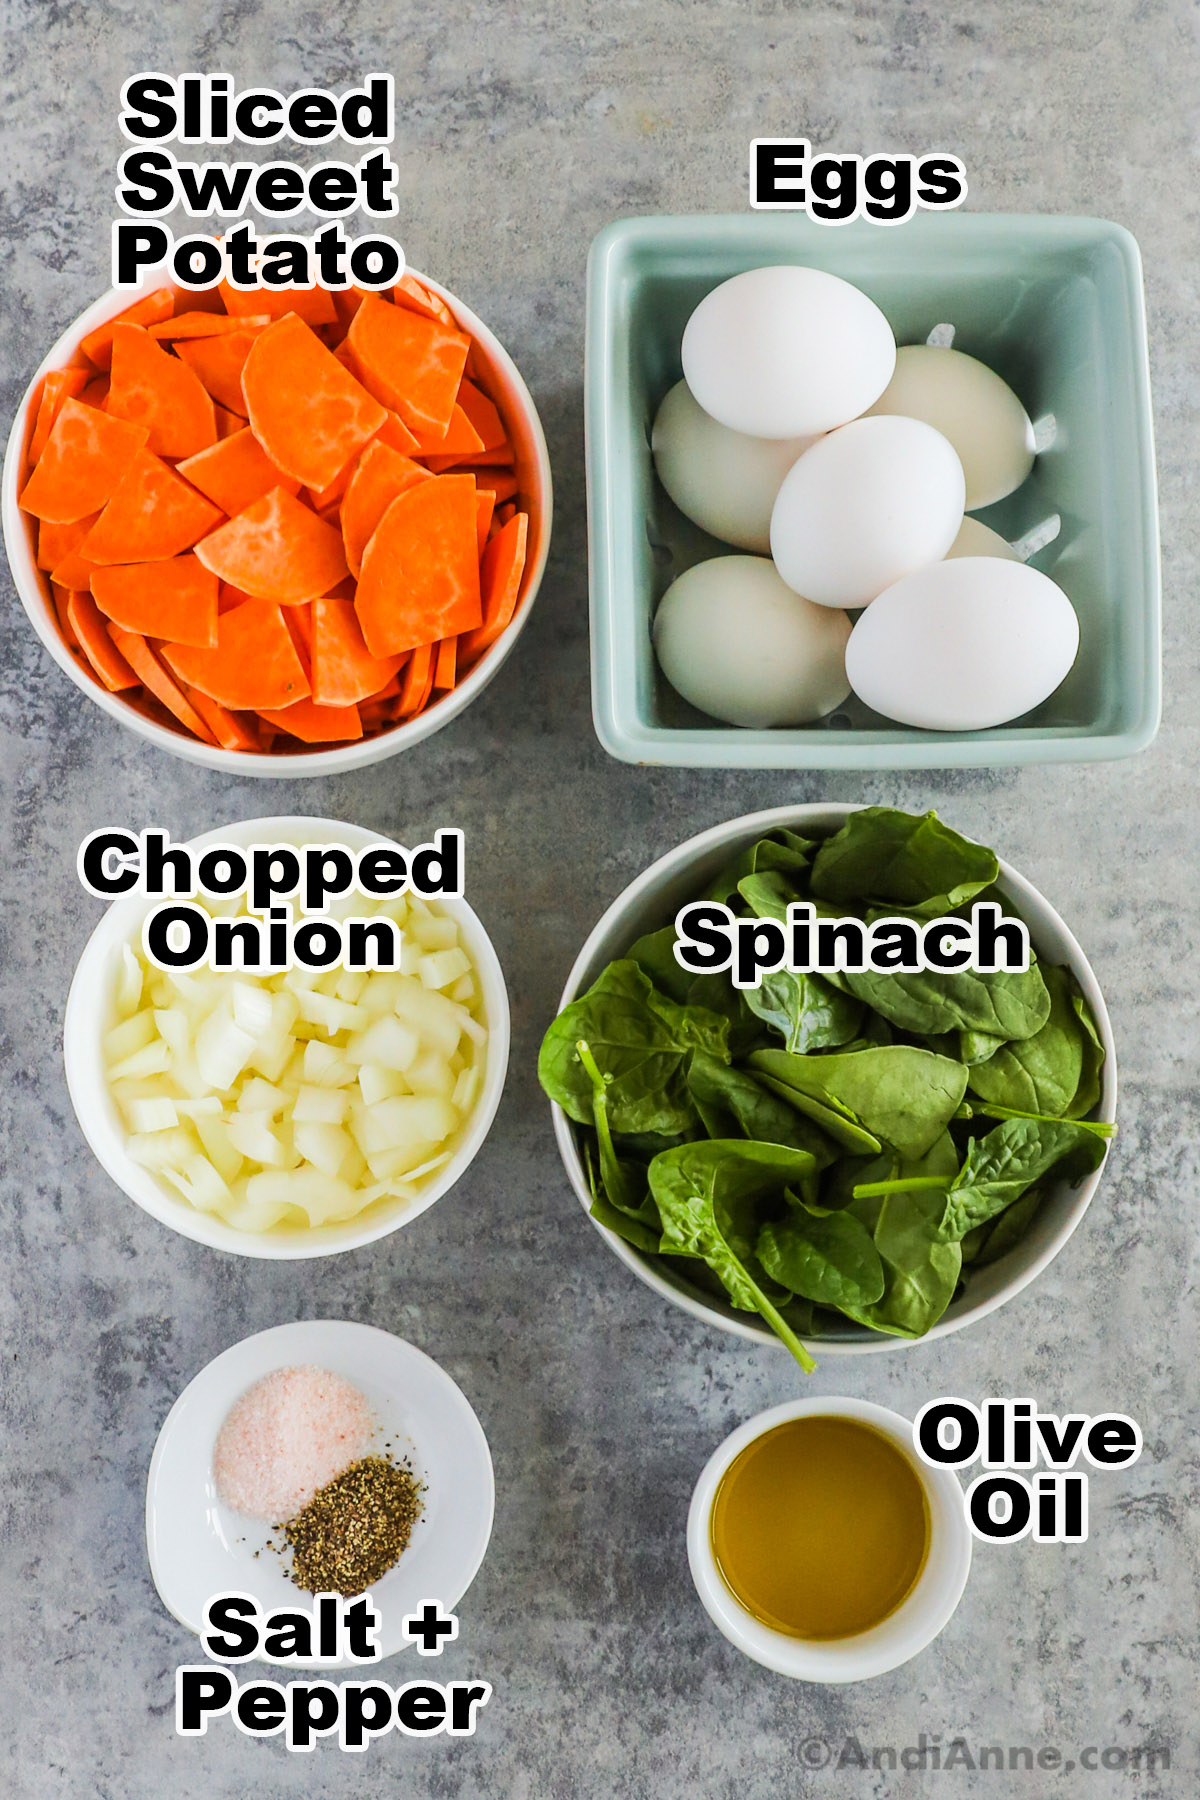 Recipe ingredients including slices of sweet potato, white eggs, chopped onion, spinach, olive oil, salt and pepper.